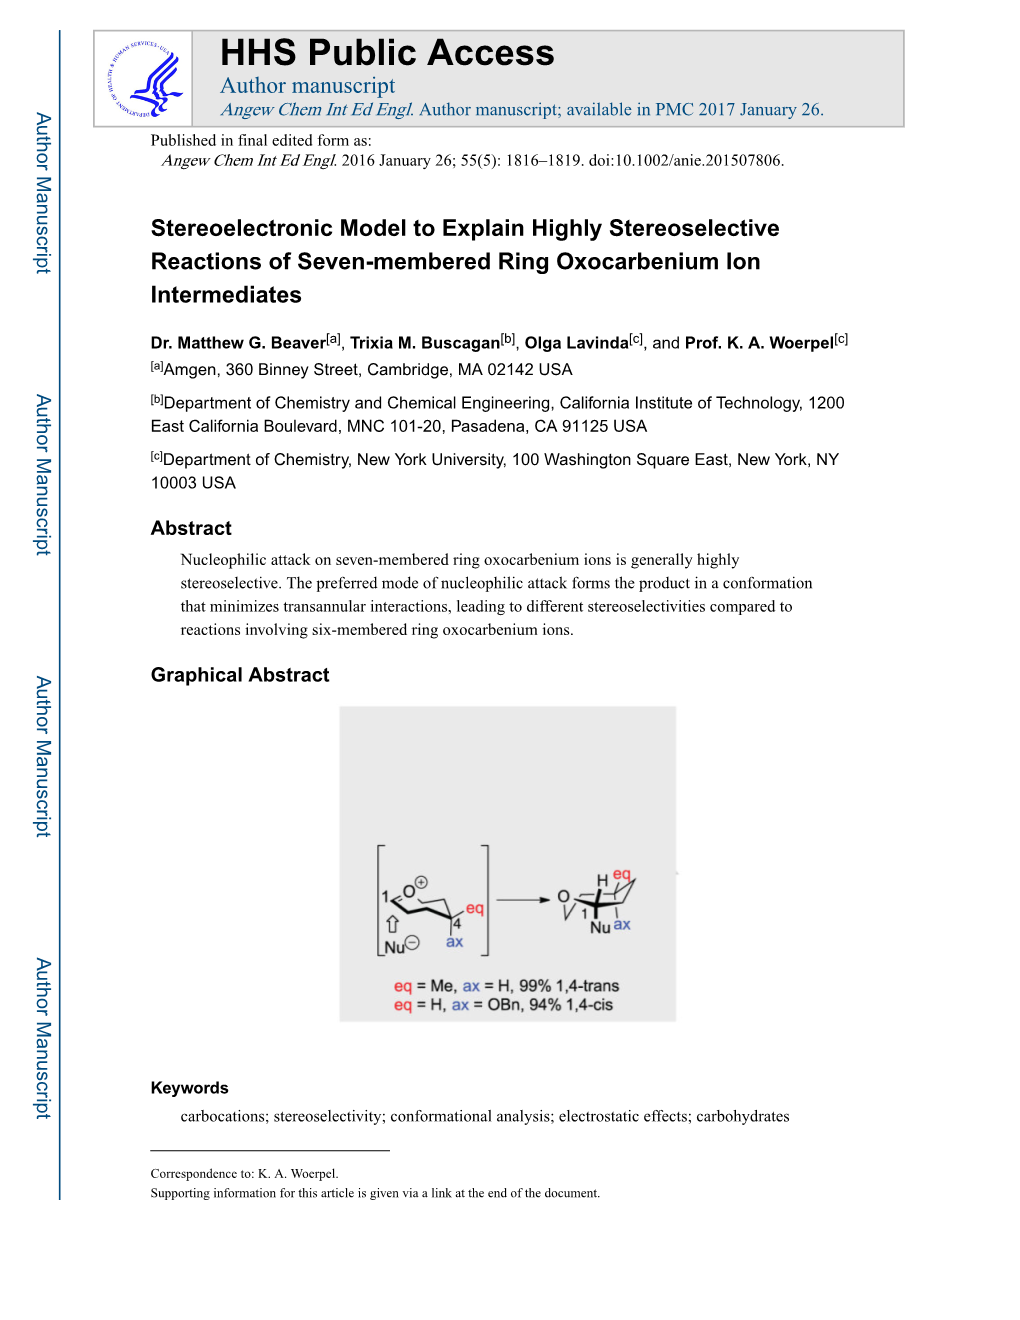 Stereoelectronic Model to Explain Highly Stereoselective Reactions of Seven-Membered Ring Oxocarbenium Ion Intermediates